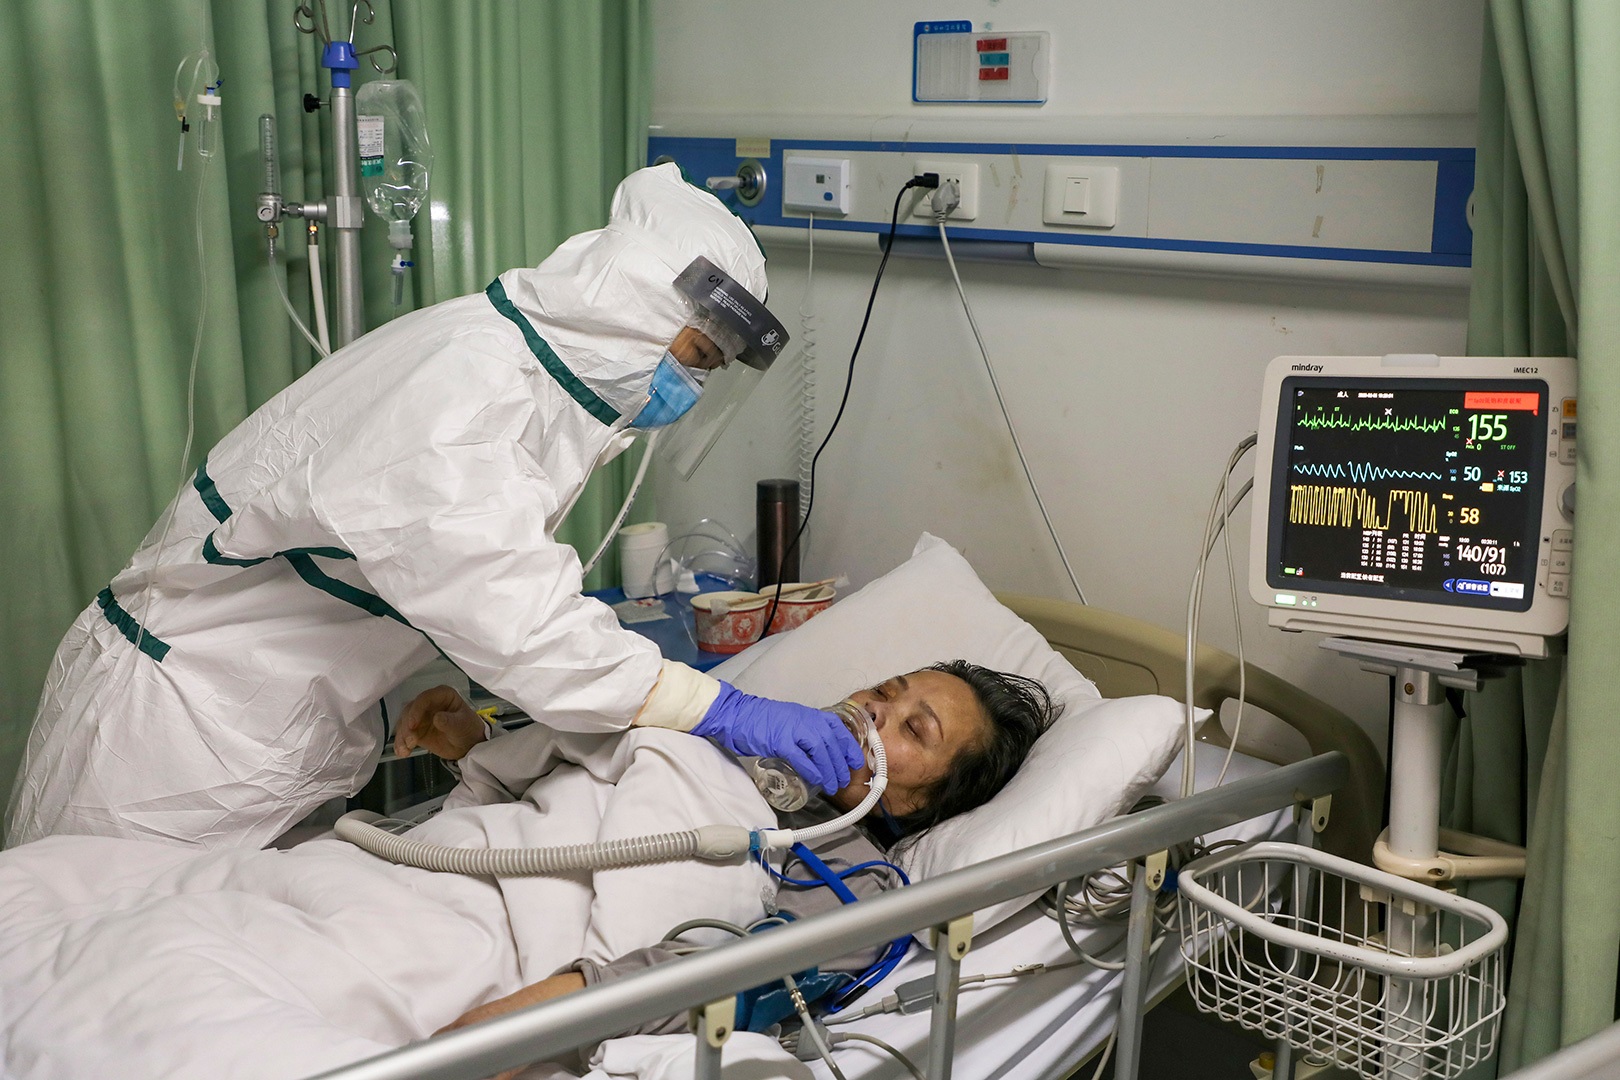 A nurse feeds water to a patient in the isolation ward for 2019 nCoV patients at a hospital in Wuhan